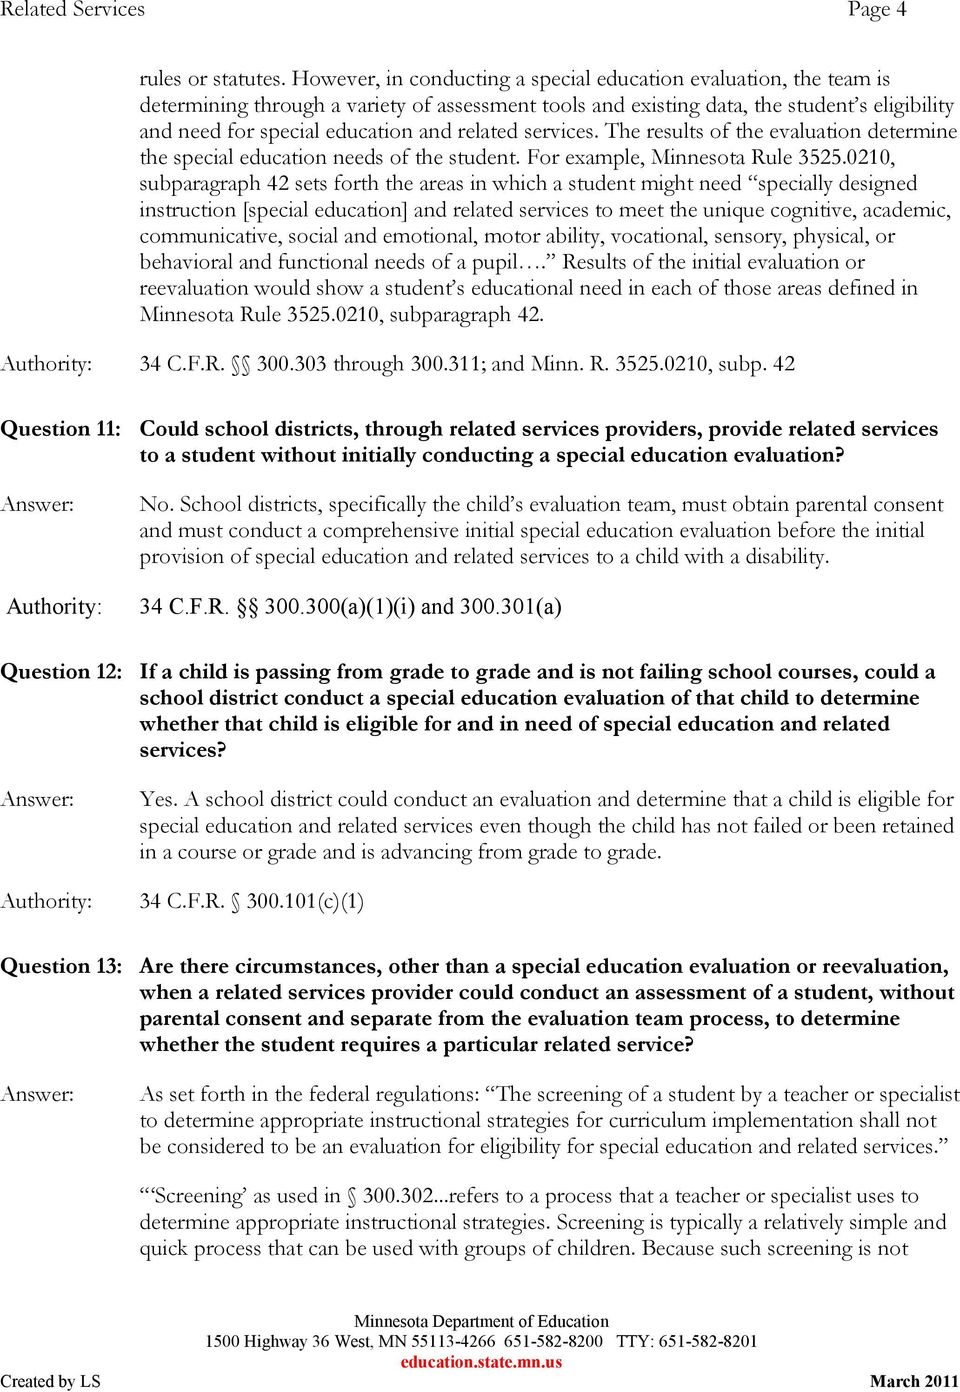 related services. The results of the evaluation determine the special education needs of the student. For example, Minnesota Rule 3525.